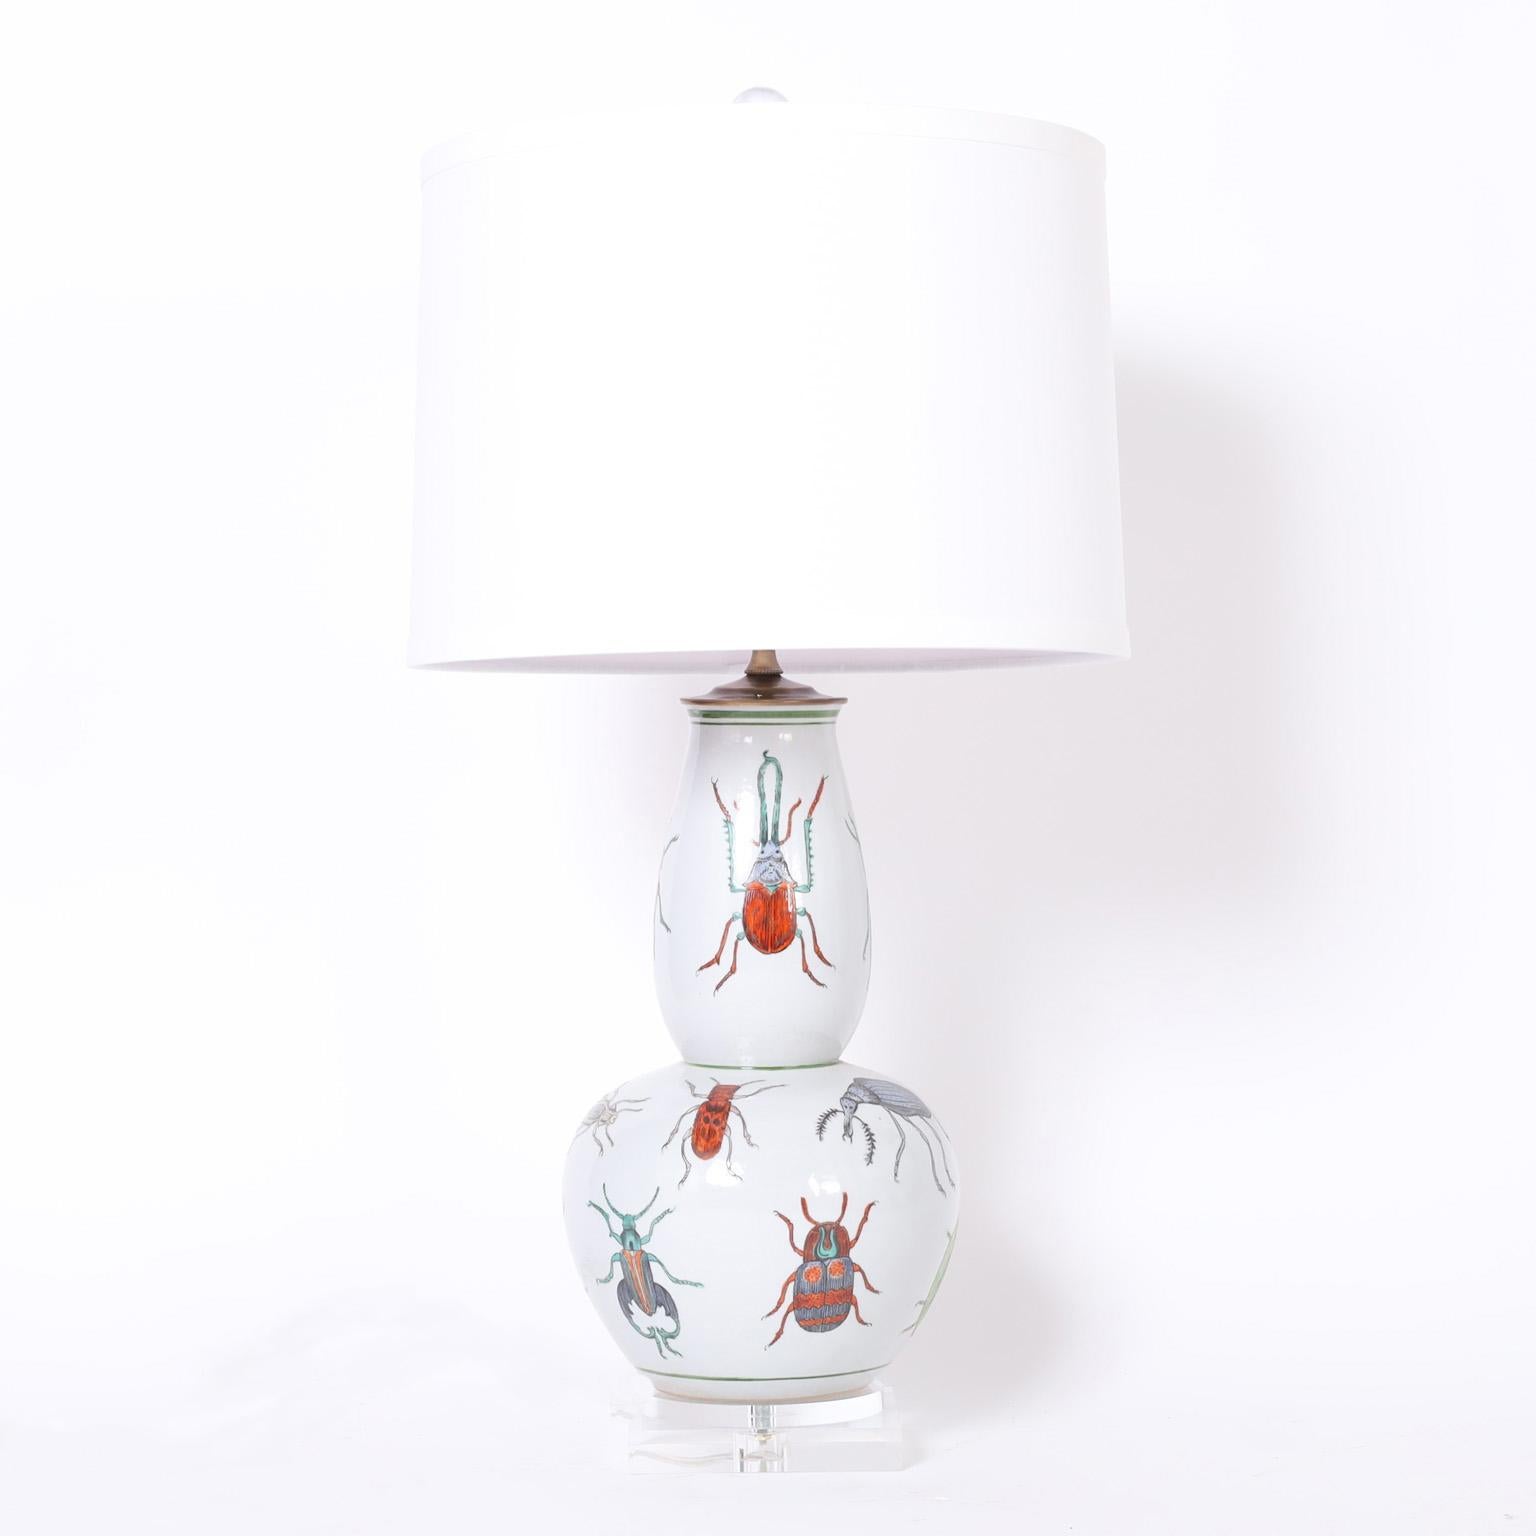 Striking pair of Chinese table lamps crafted in porcelain in a classic form, hand decorated with insects and presented on lucite bases.